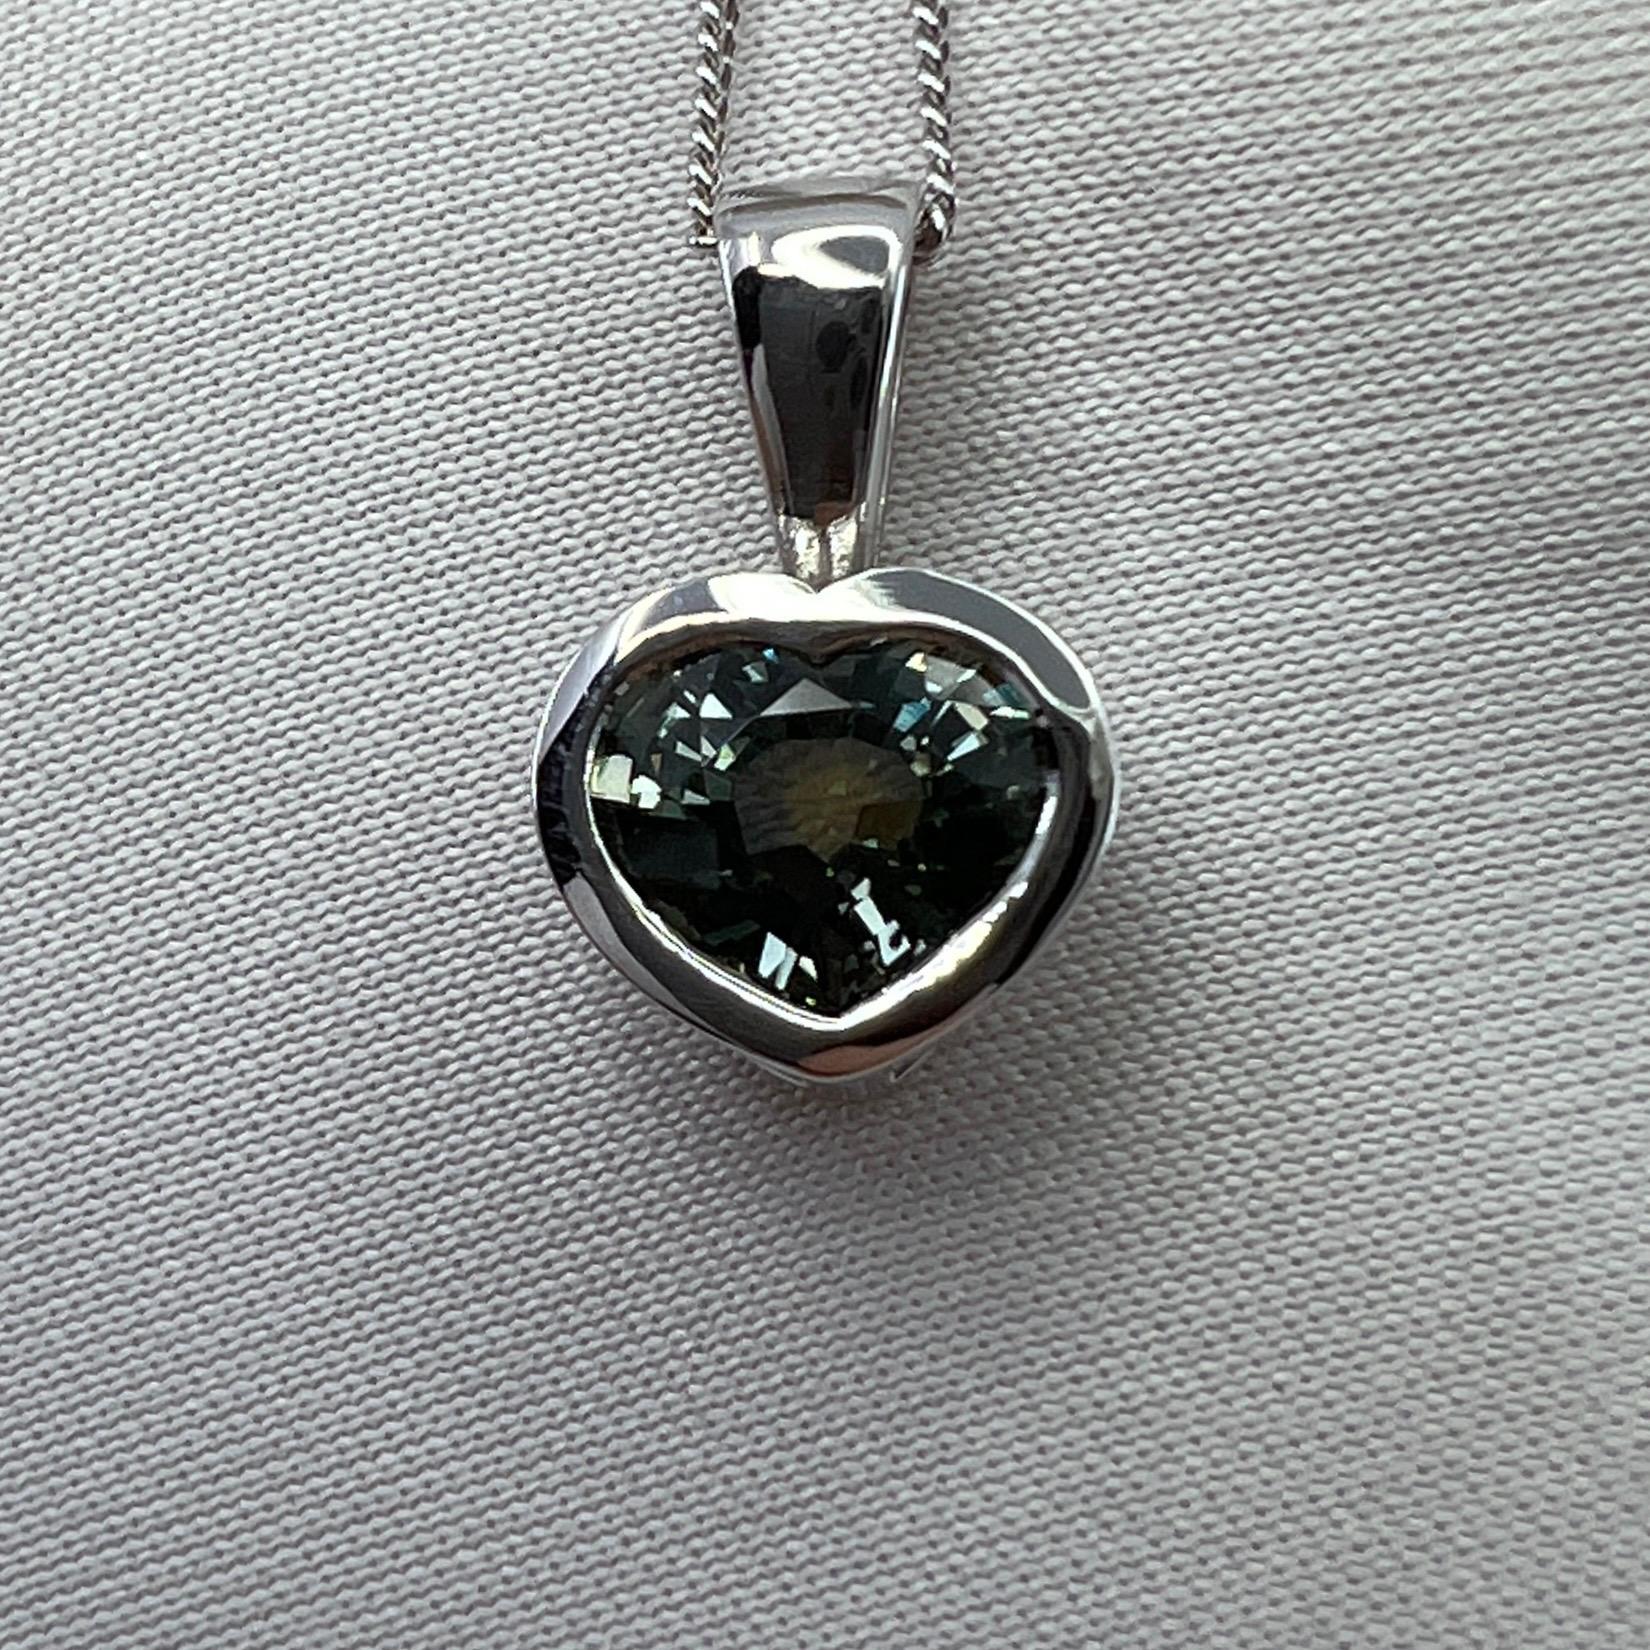 Rare Colour Change Heart Cut Sapphire 18k White Gold Solitaire Pendant

A fine IGI certified 1.73 carat untreated sapphire with stunning colour change effect. Changing colour depending on the light its viewed in. Very rare for natural gemstones,